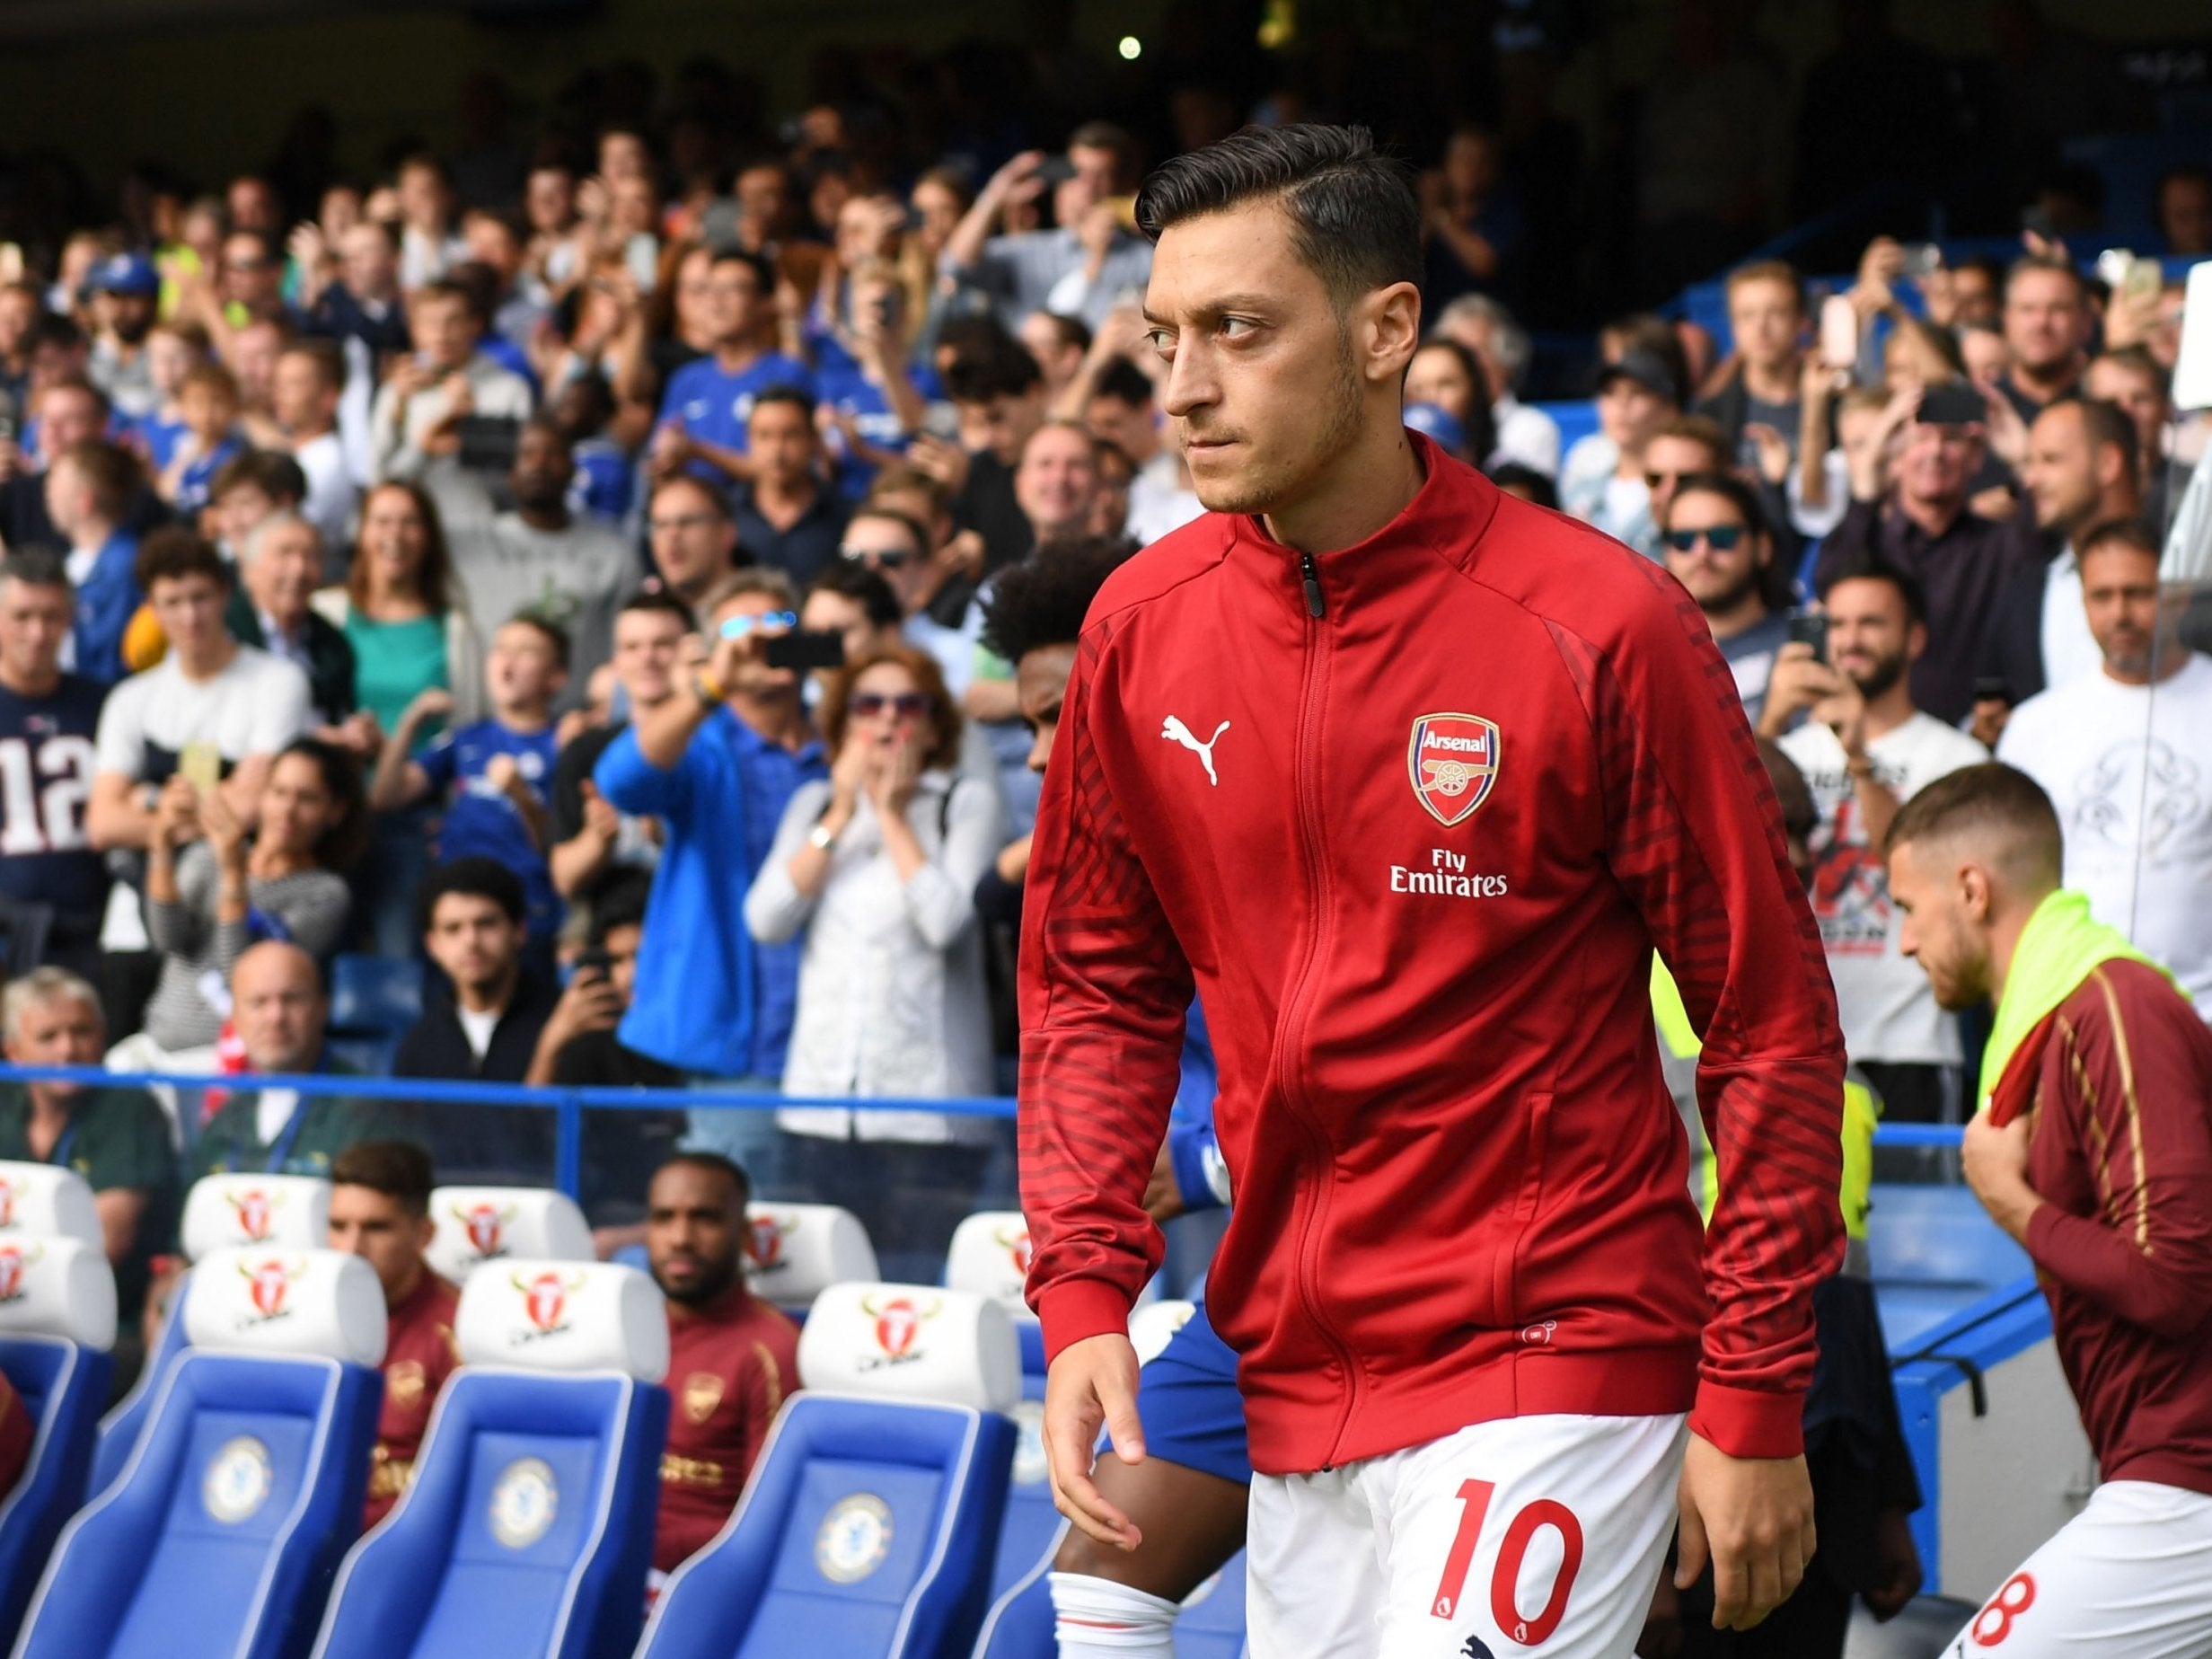 Cardiff vs Arsenal LIVE - Latest score and goal updates, what time does it start, TV channel, where can I watch it, team news as Mesut Özil starts